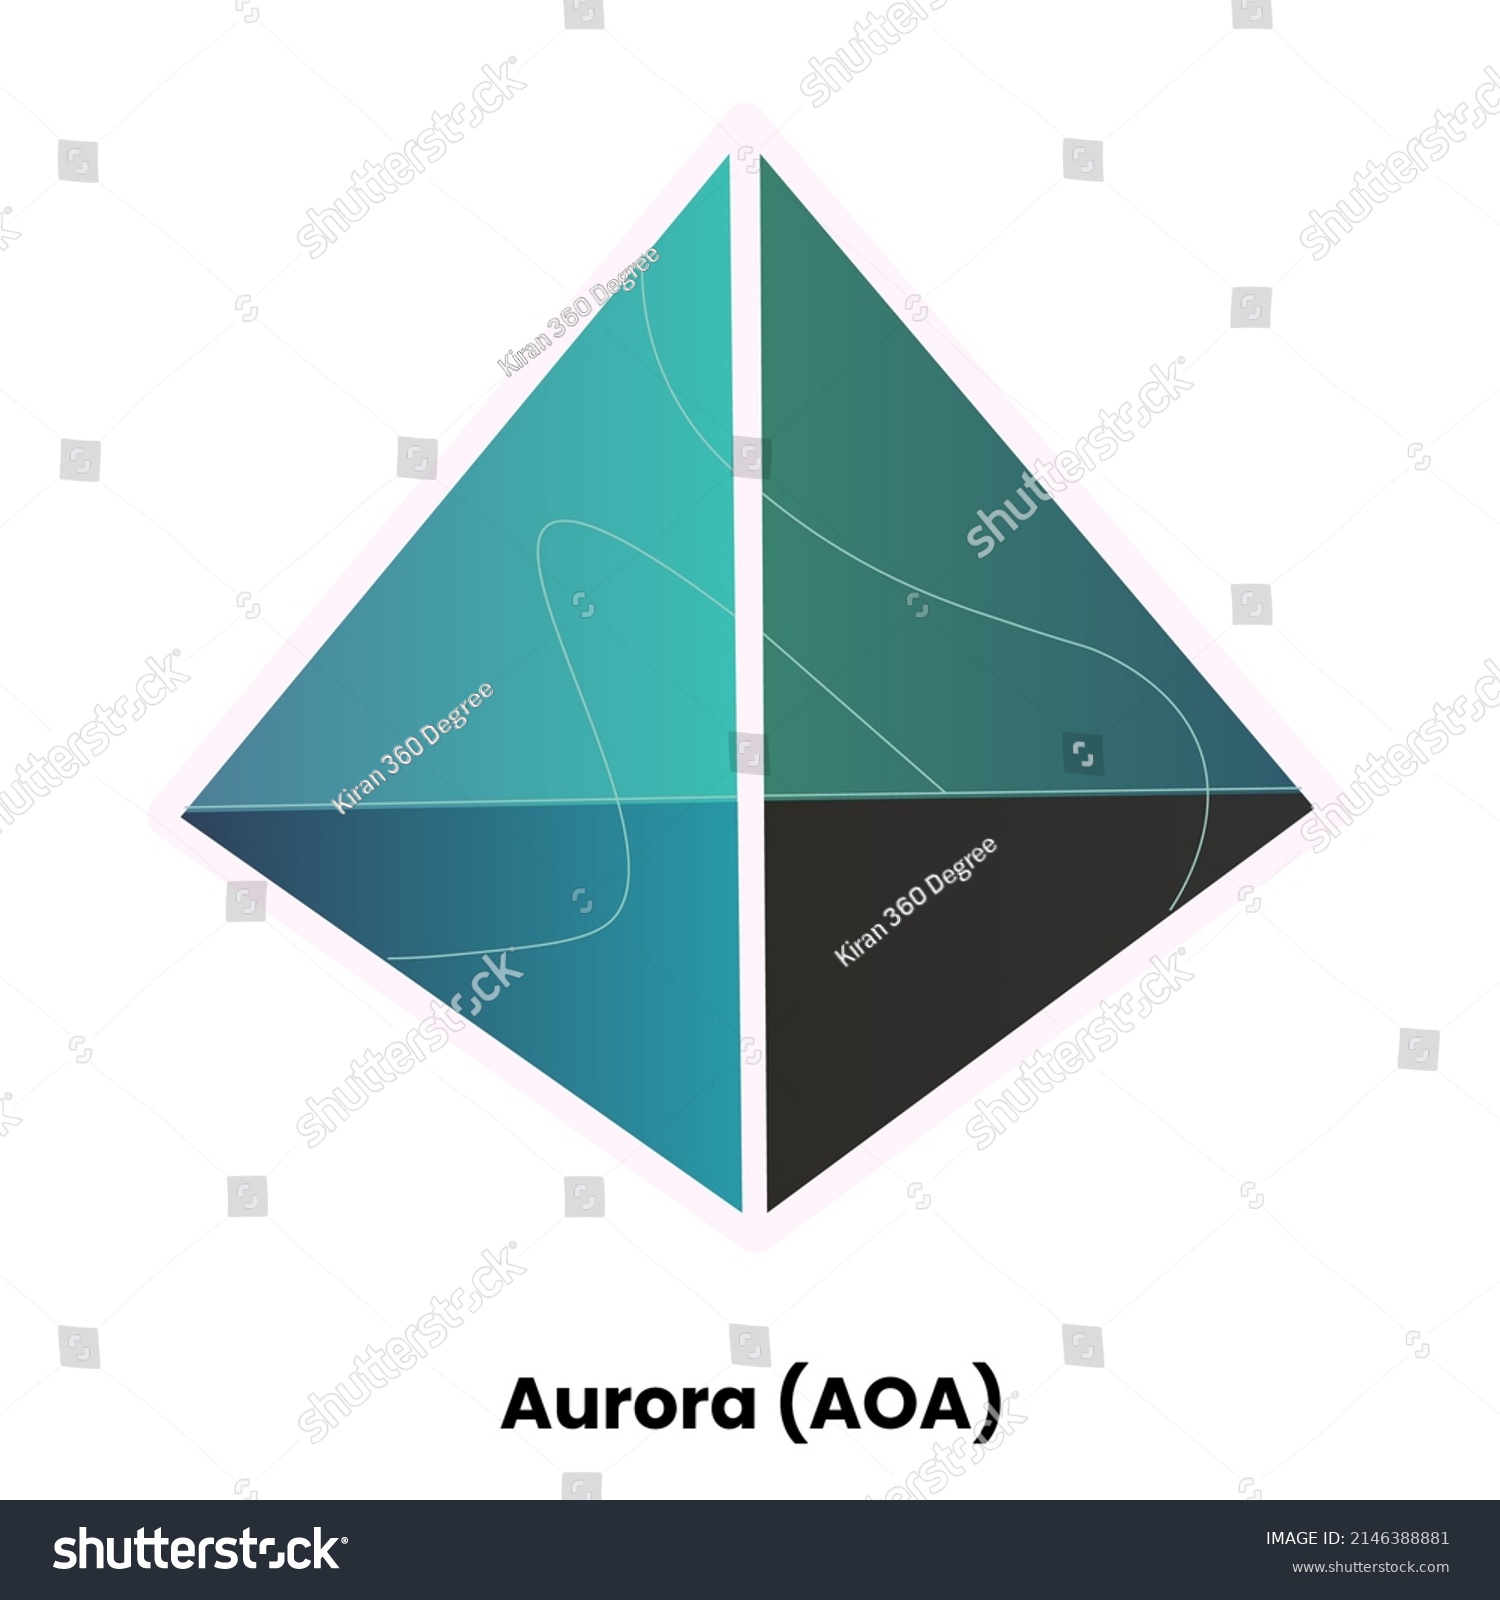 SVG of Aurora crypto currency with symbol AOA. Crypto logo vector illustration for stickers, icon, badges, labels and emblem designs. svg